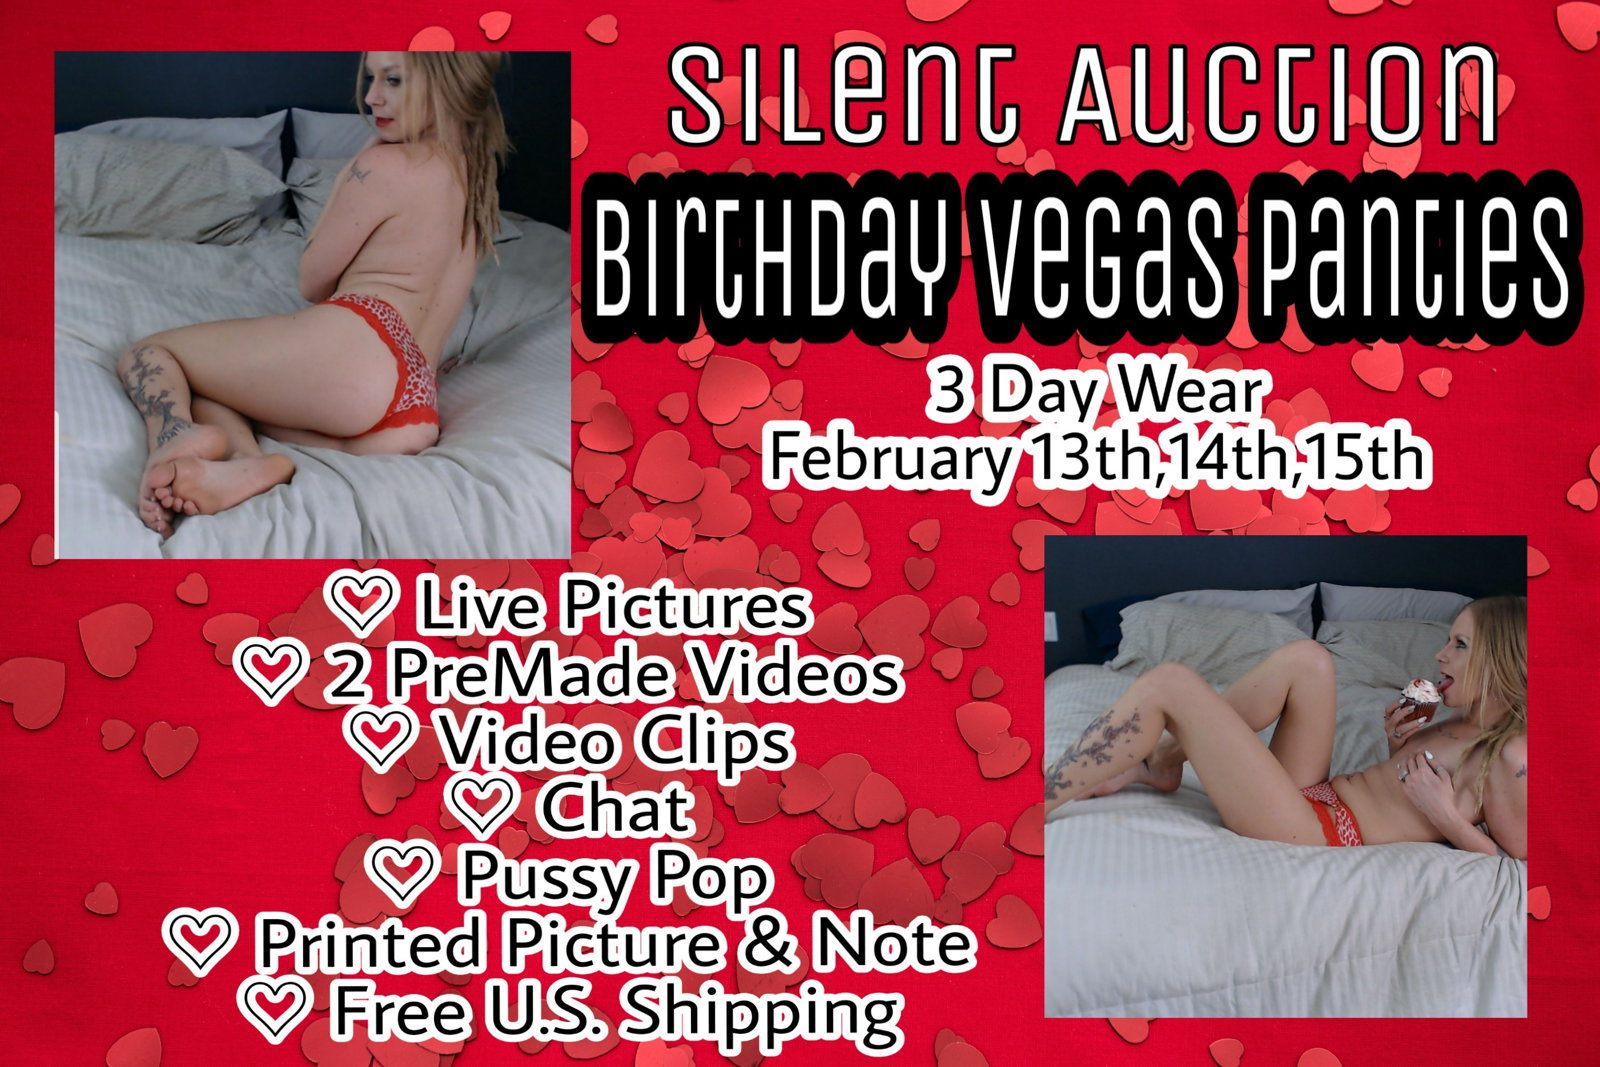 Watch the Photo by PetiteBlondeMilf with the username @Petiteblondemilf, who is a star user, posted on February 6, 2019. The post is about the topic Creampie Panties. and the text says '▪WIN my Birthday Vegas Panties▪

Silent Auction- Starting Bid is $60

3 day wear
Chat, live, pictures & videos sent
2 premade videos
Free shipping 

Message me to bid
HIGHEST BIDDER will win on February 12th

#PantySeller #PantyFetish #PantySniffer..'